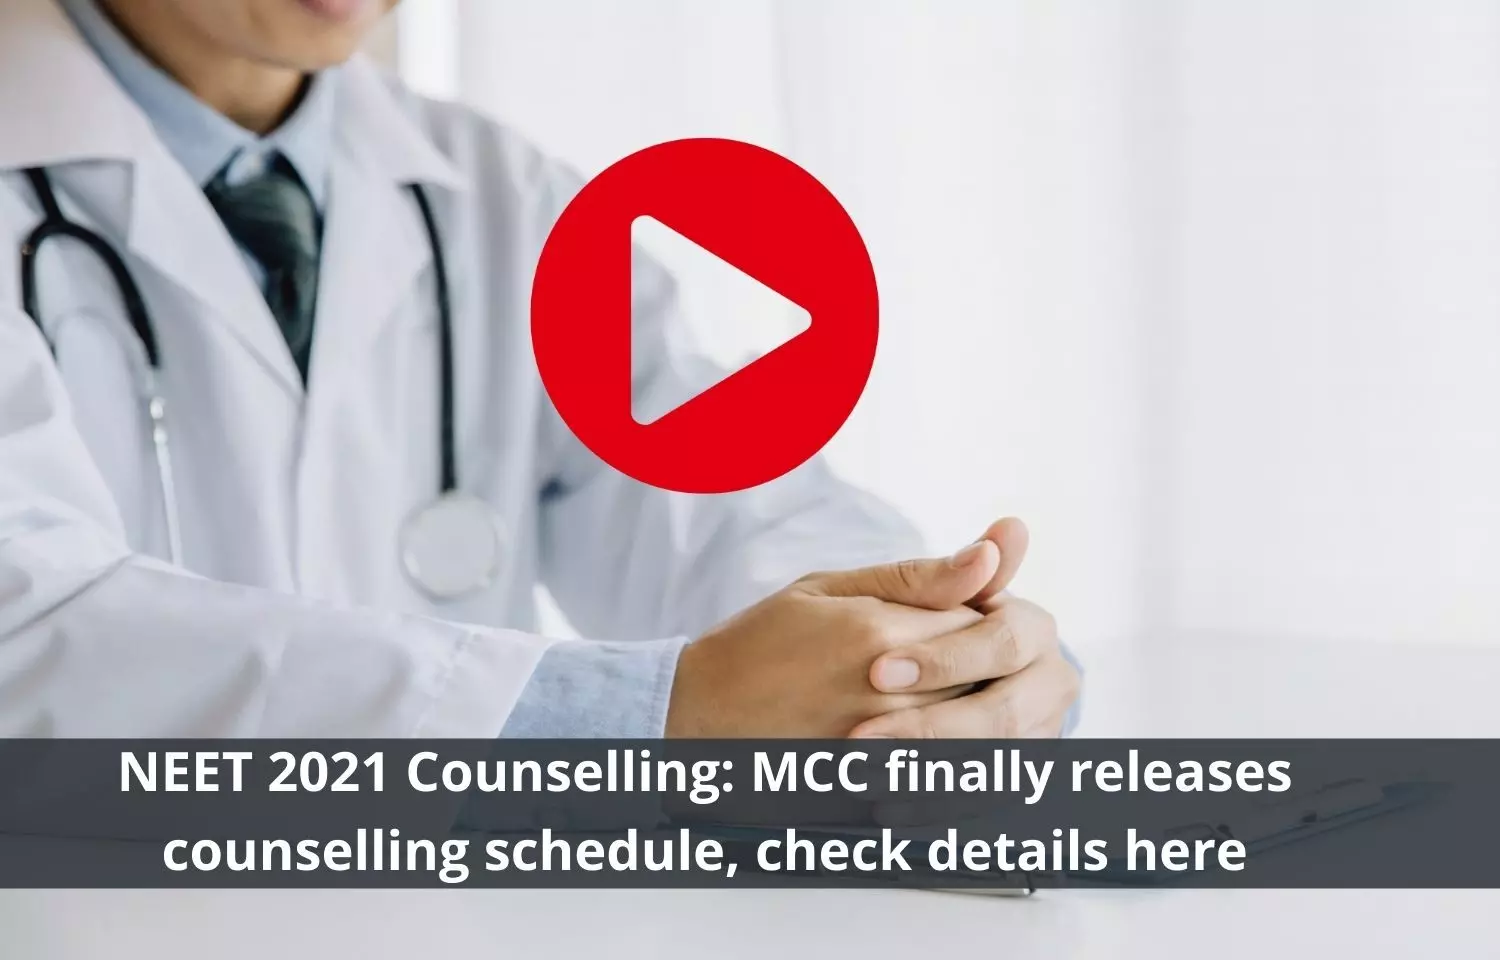 MCC finally releases NEET 2021 AIQ counselling schedule, details